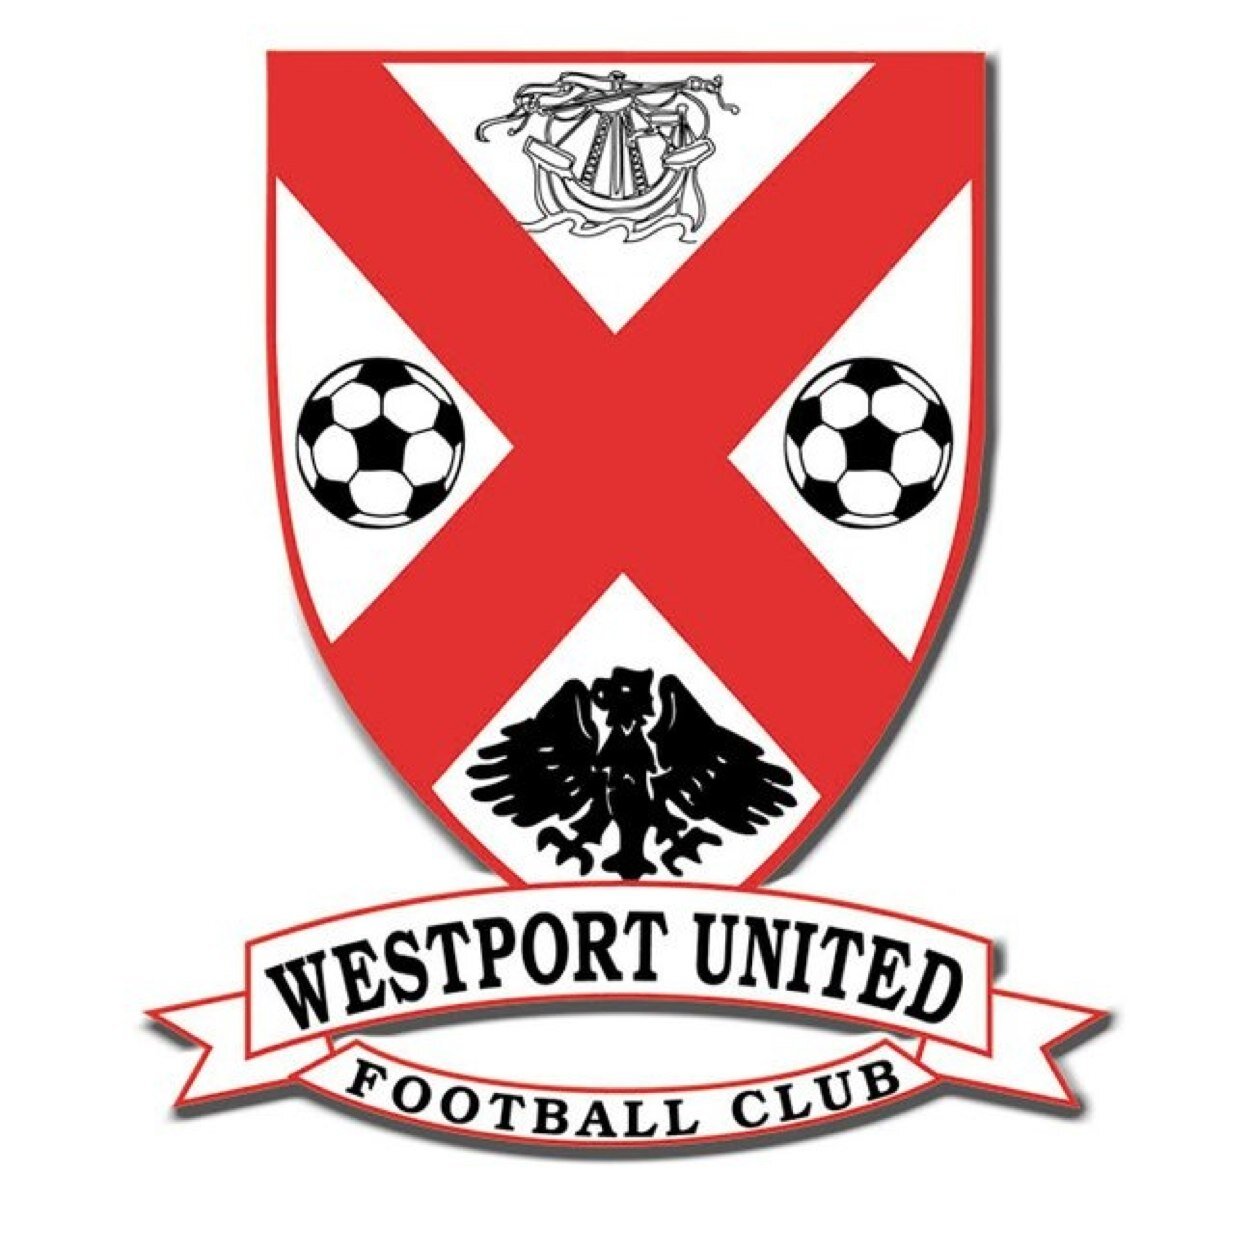 Westport United FC were founded in 1911. The home ground is United Park. The Club Colours are Red and Black. FAI Junior Cup winners in 2005.